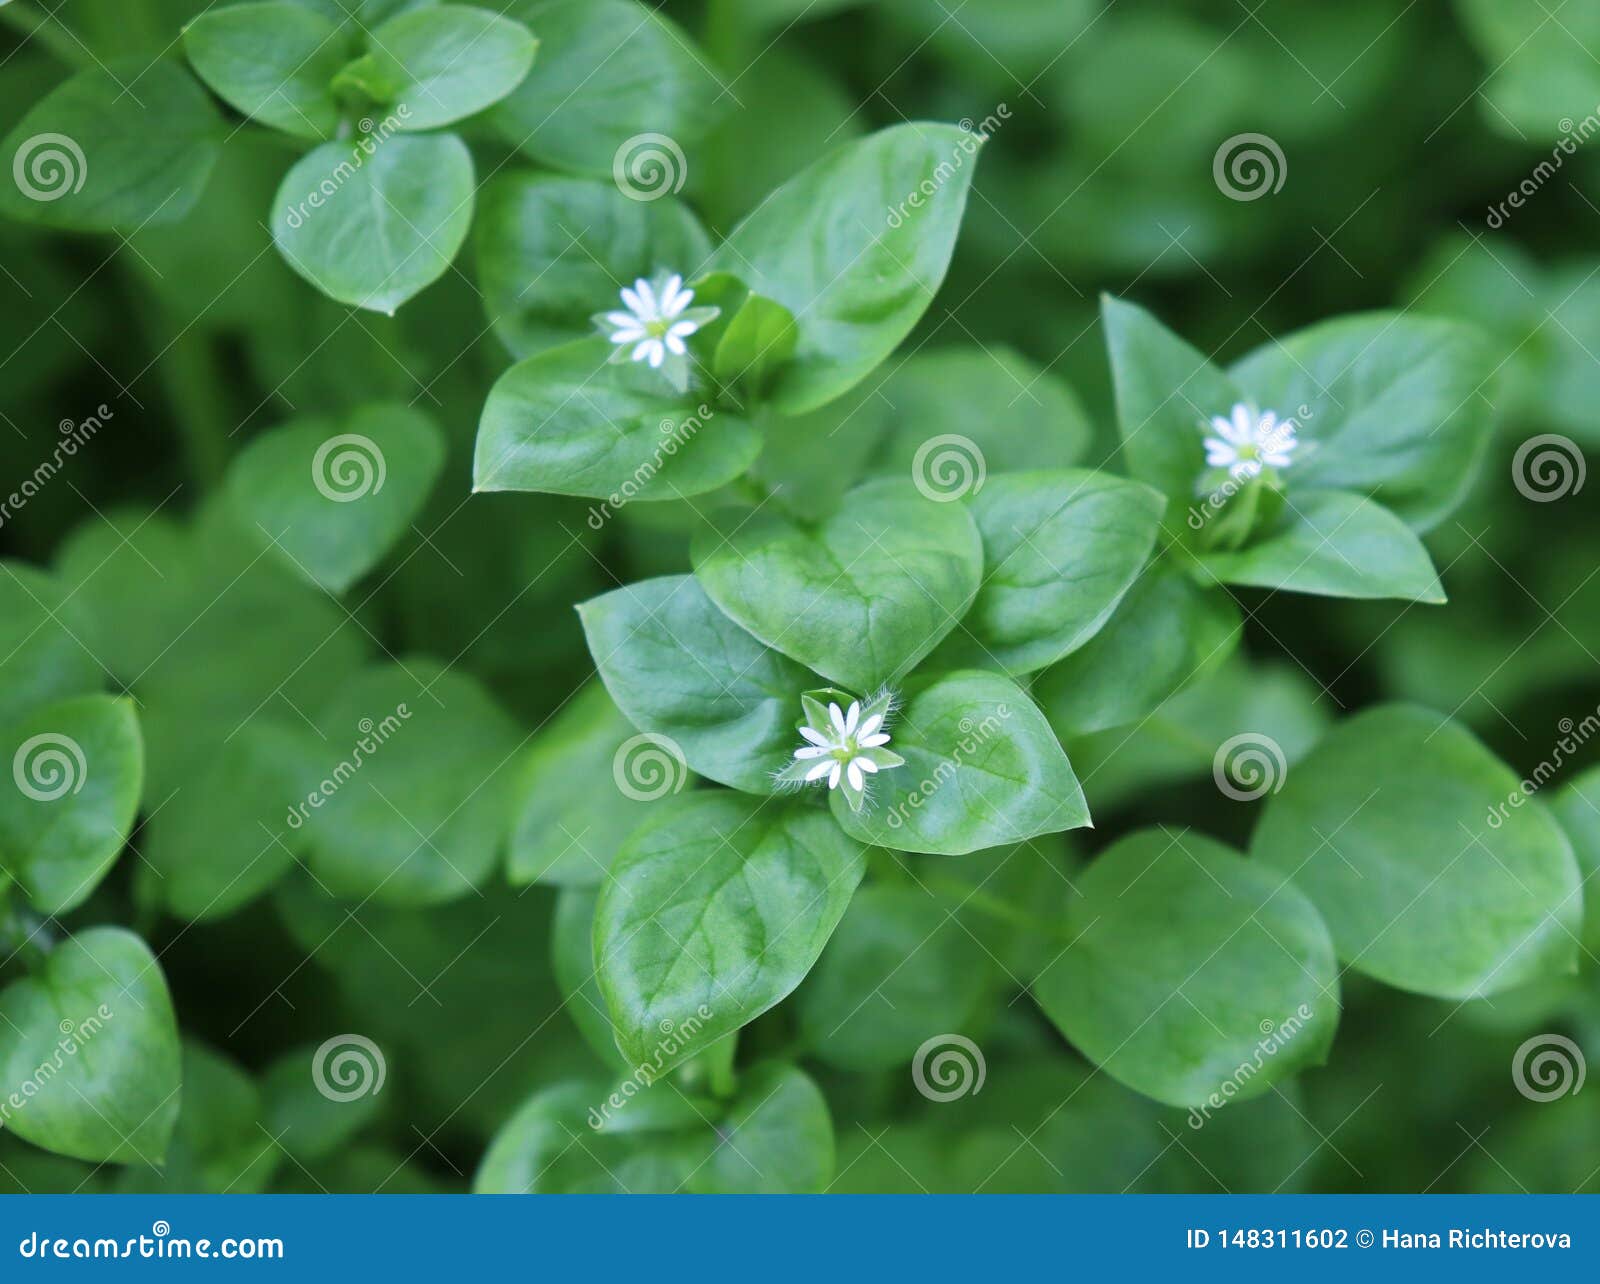 chickweed ,stellaria media. young taste very gently with flavor of nuts. you can use them in fresh vegetable salads. the chickweed